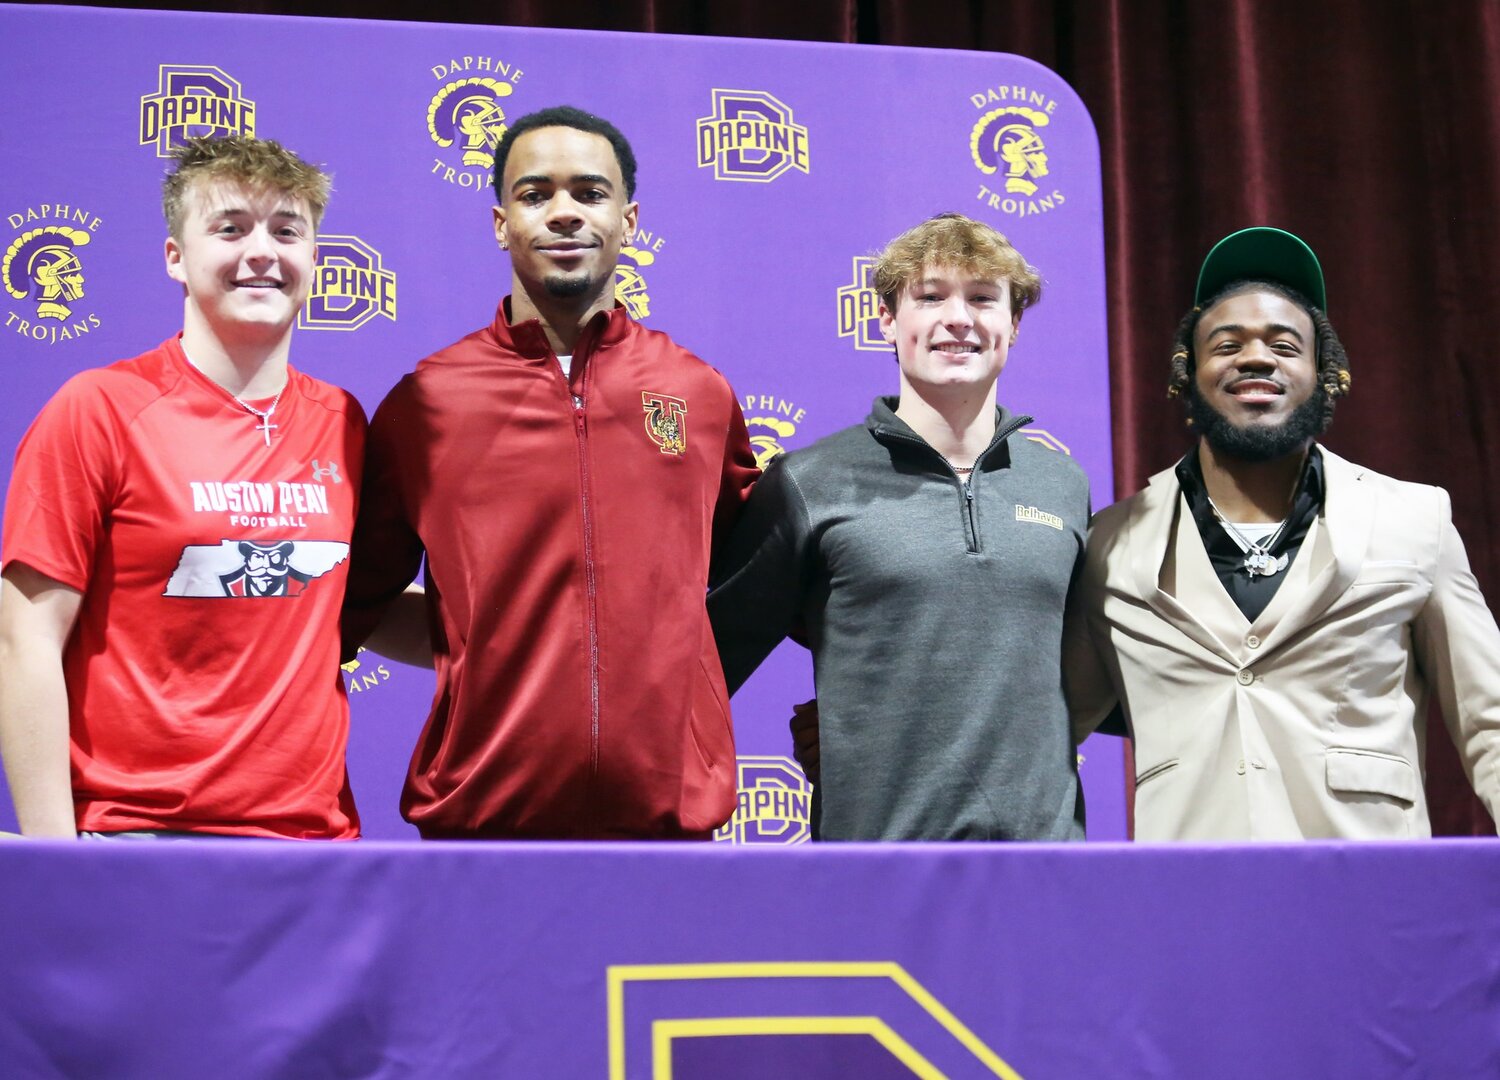 Hayden McLaurin (Austin Peay), Al Woodard (Tuskegee), John Davis (Belhaven) and Nick Clark (Delta State) became the Daphne Trojans’ newest college football signees during a ceremony at Trojan Hall on Wednesday, Feb. 7. The quartet of Daphne football players helped their team return to the postseason with a 4-2 region record.